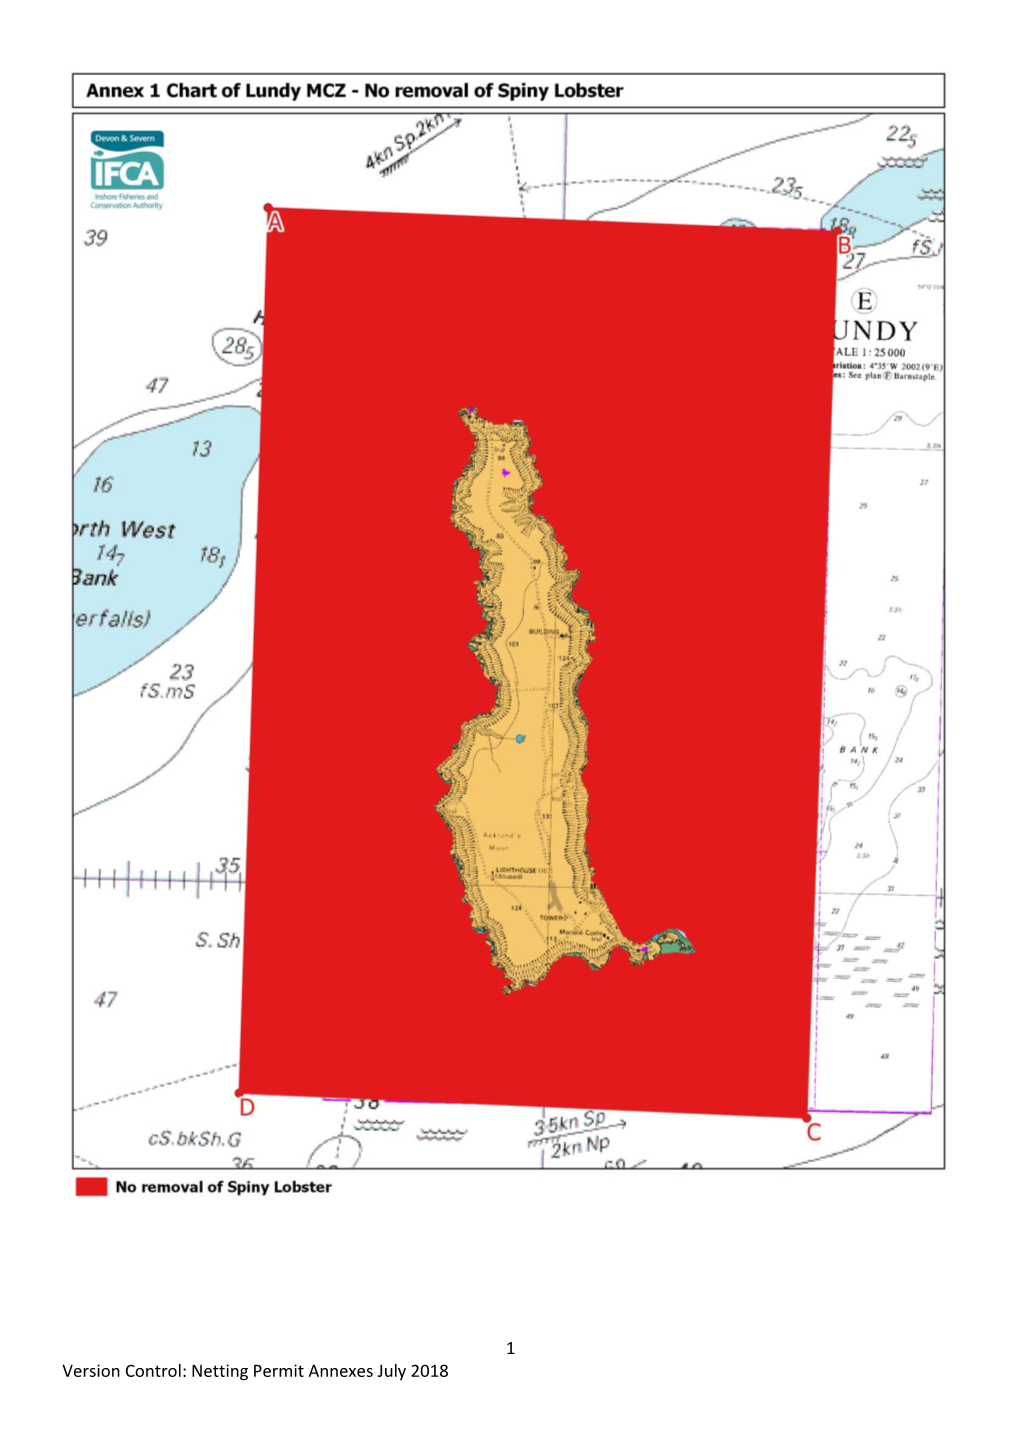 Netting Permit Annexes July 2018 Annex 1 Lundy MCZ – No Removal of Spiny Lobster